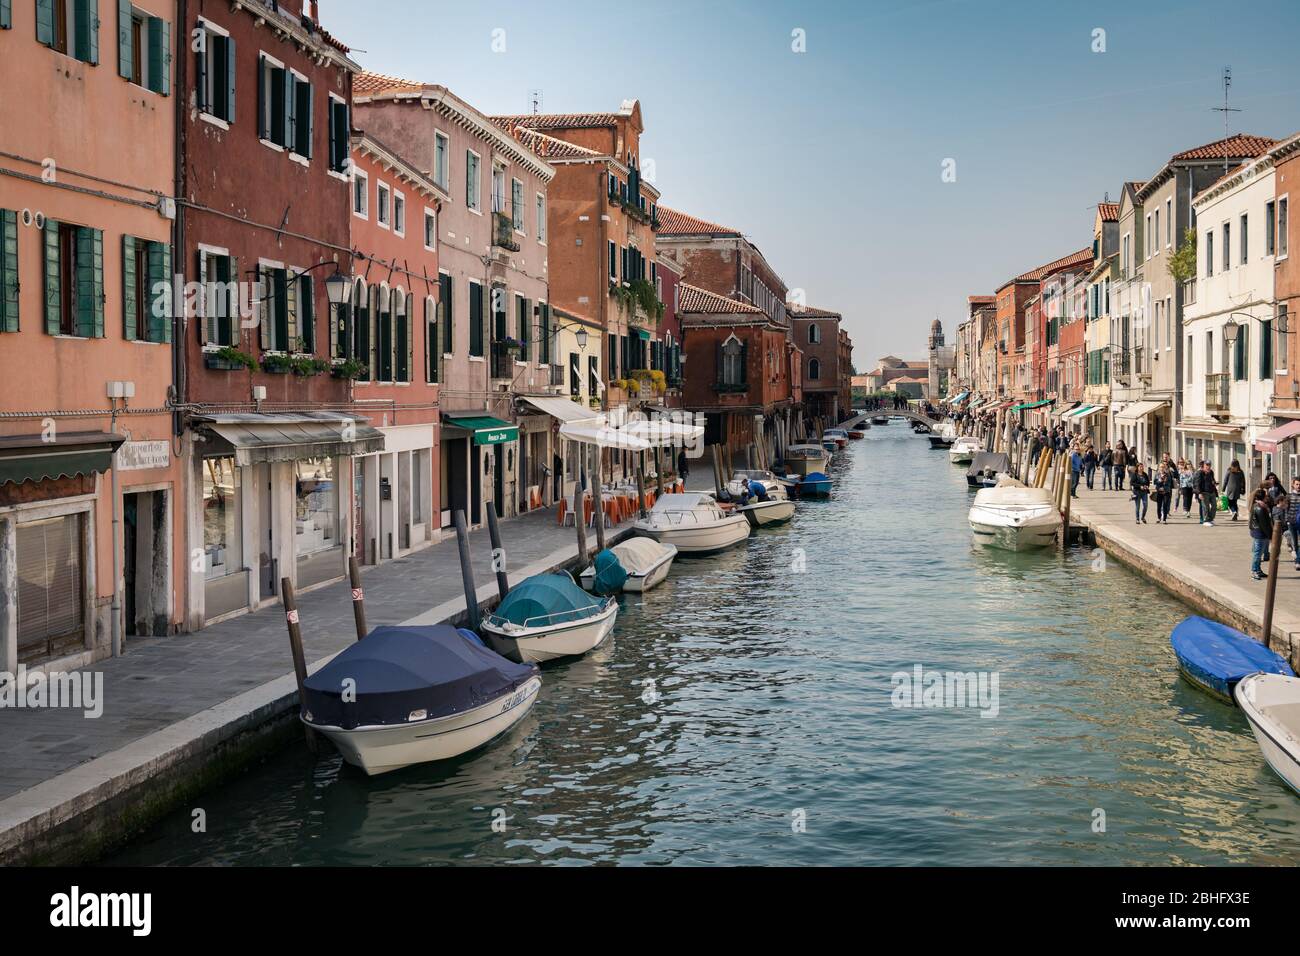 Murano, Italy - April 23, 2017: Main canal of Murano, an island that is part of the Venice lagoon. Stock Photo